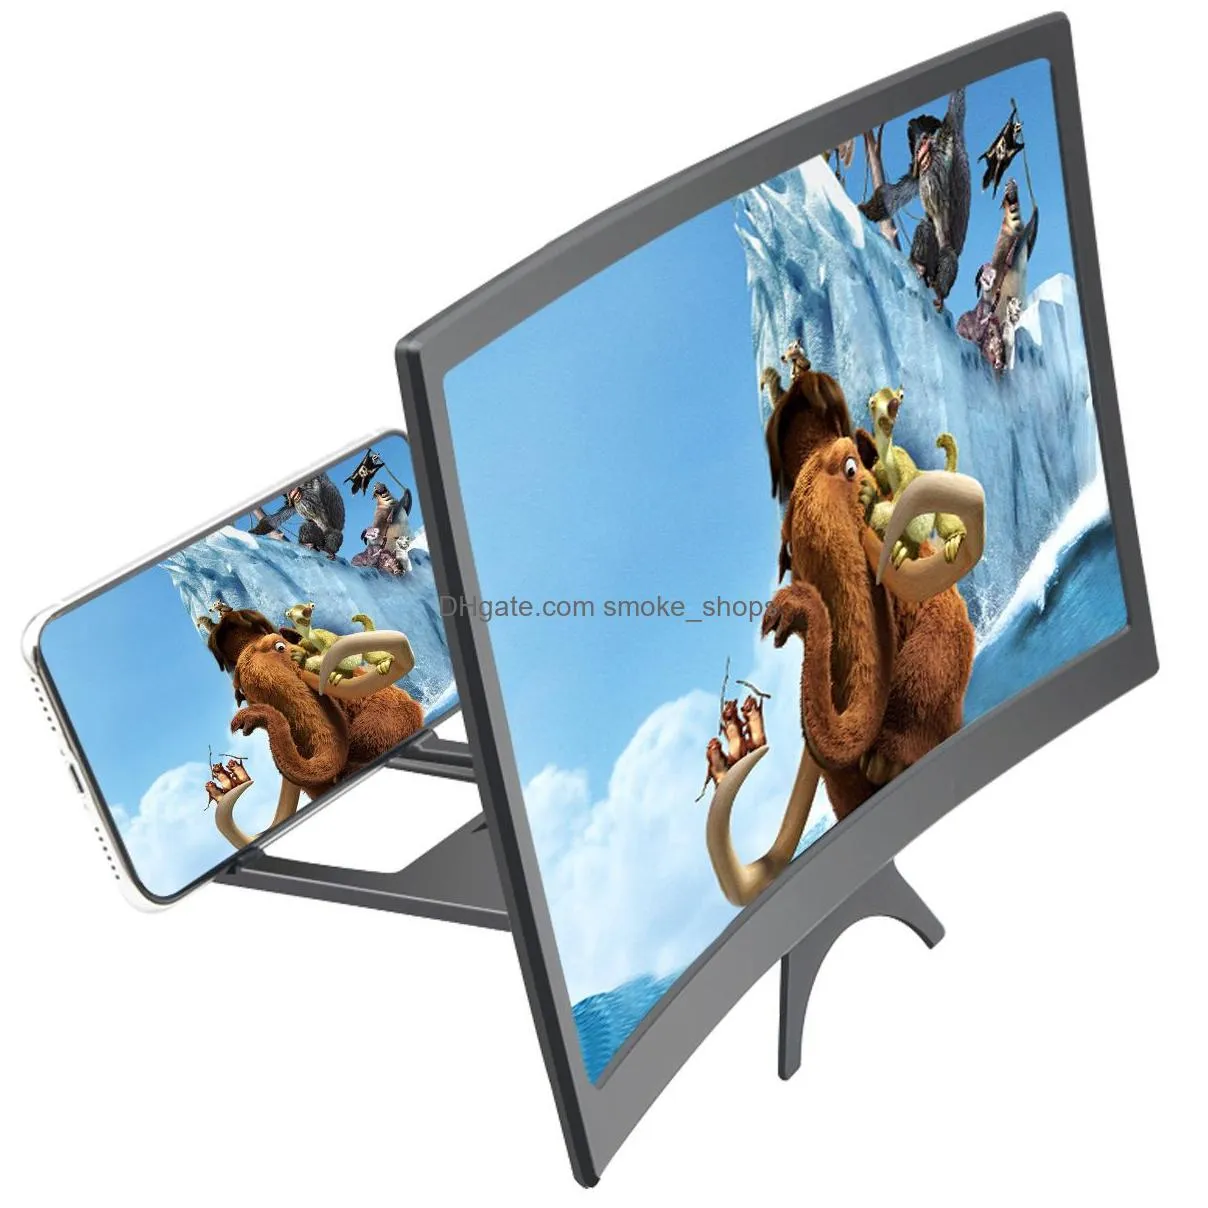 12 inch curved phone screen amplifier hd 3d video mobile phone magnifying glass stand bracket foldable phone holder projector vtkt2055